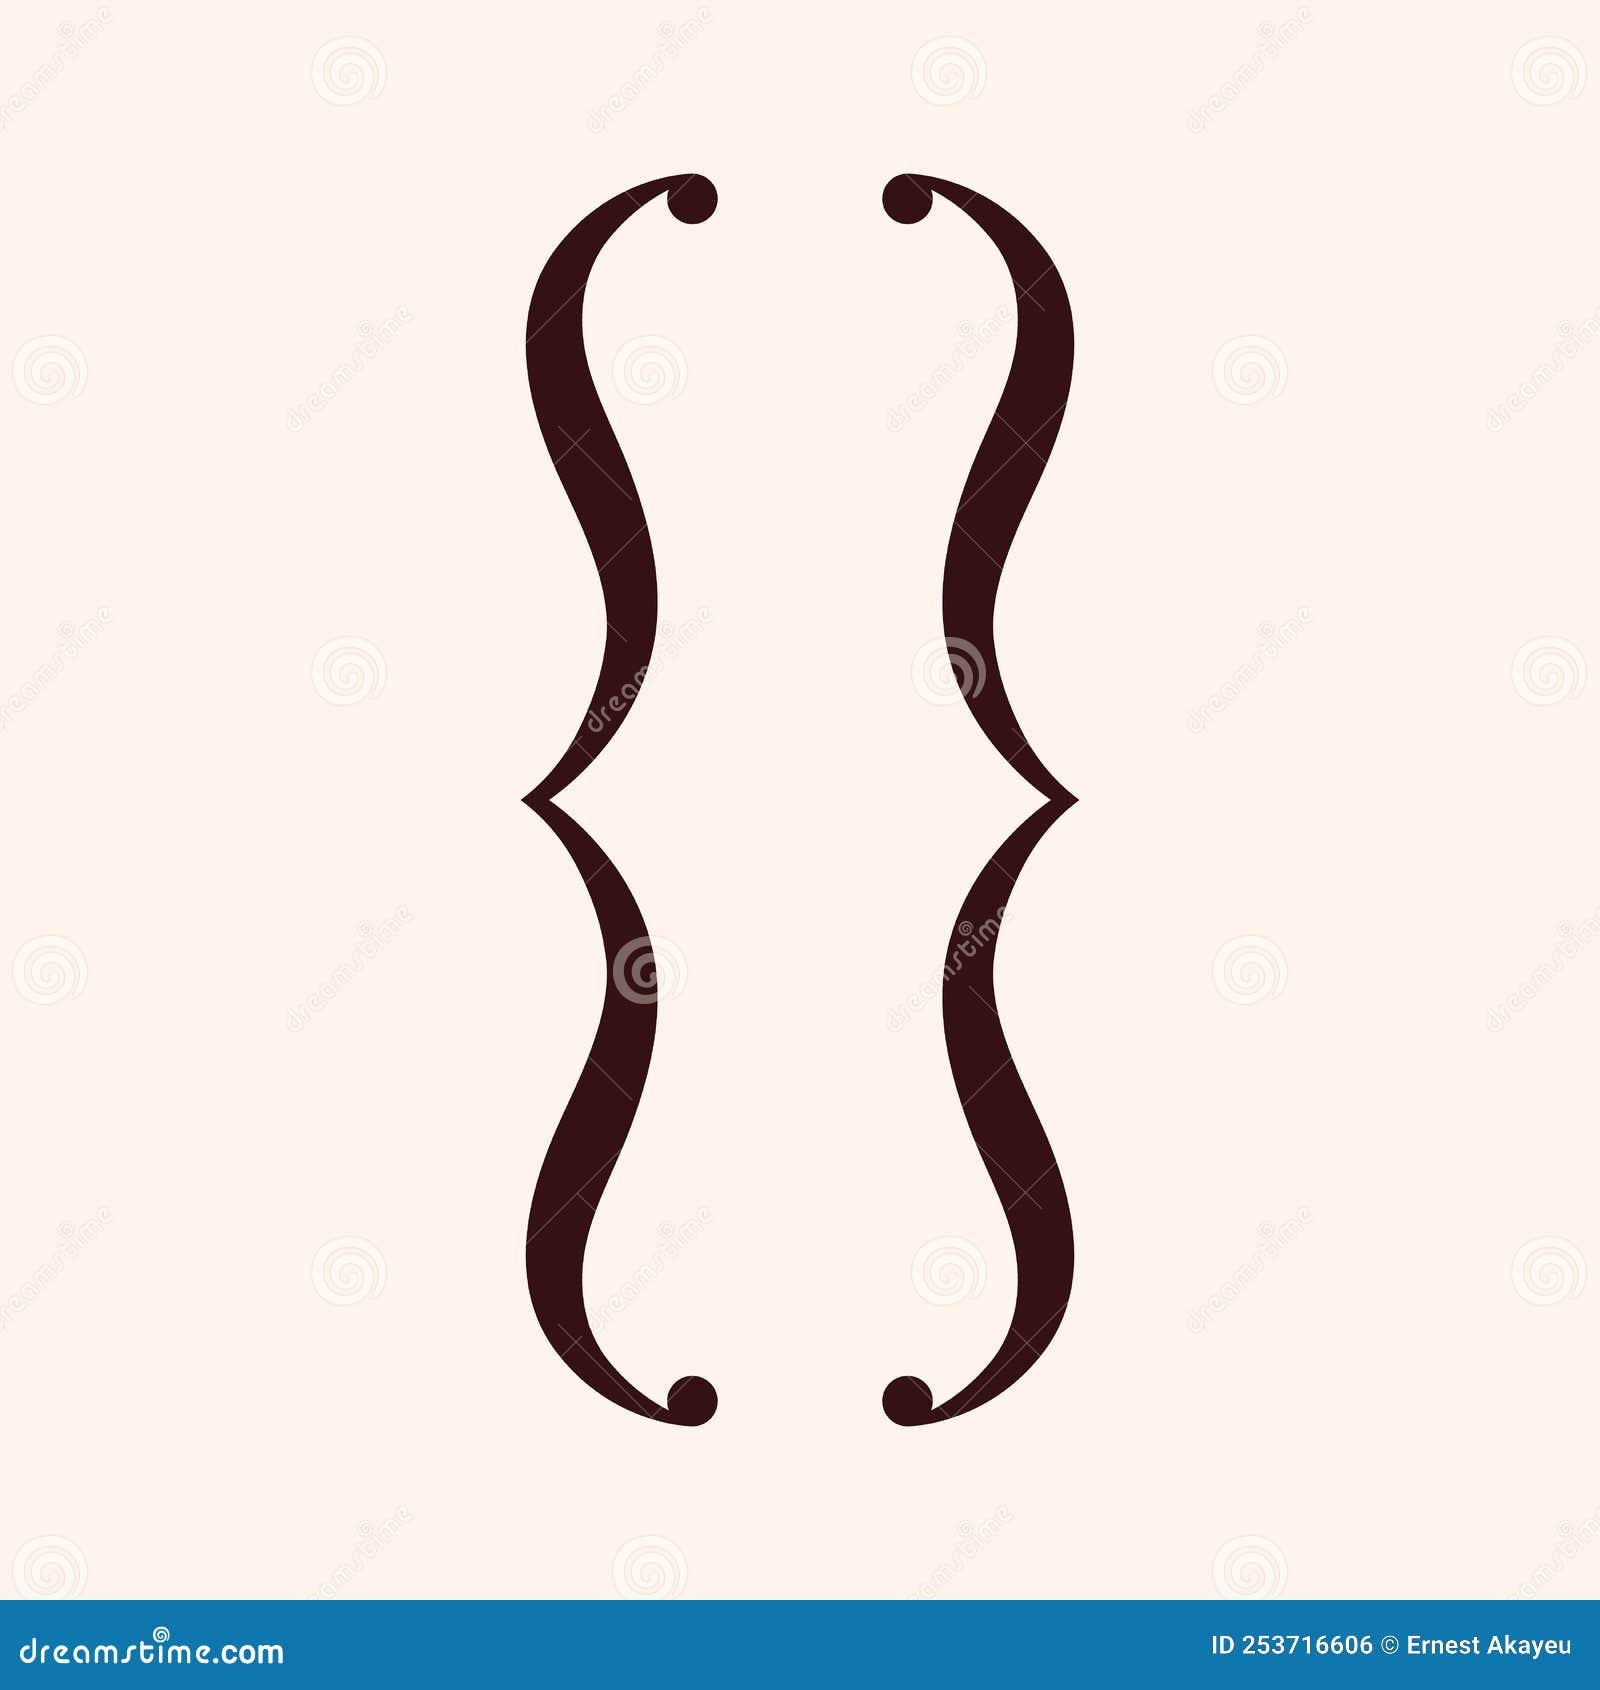 Curly braces symbol and dobule braces, symmetric sign for text quote,  mathematics, typography swirly mark, opening and closing frames for  punctuation in maths on background flat vector illustration. 29269513  Vector Art at